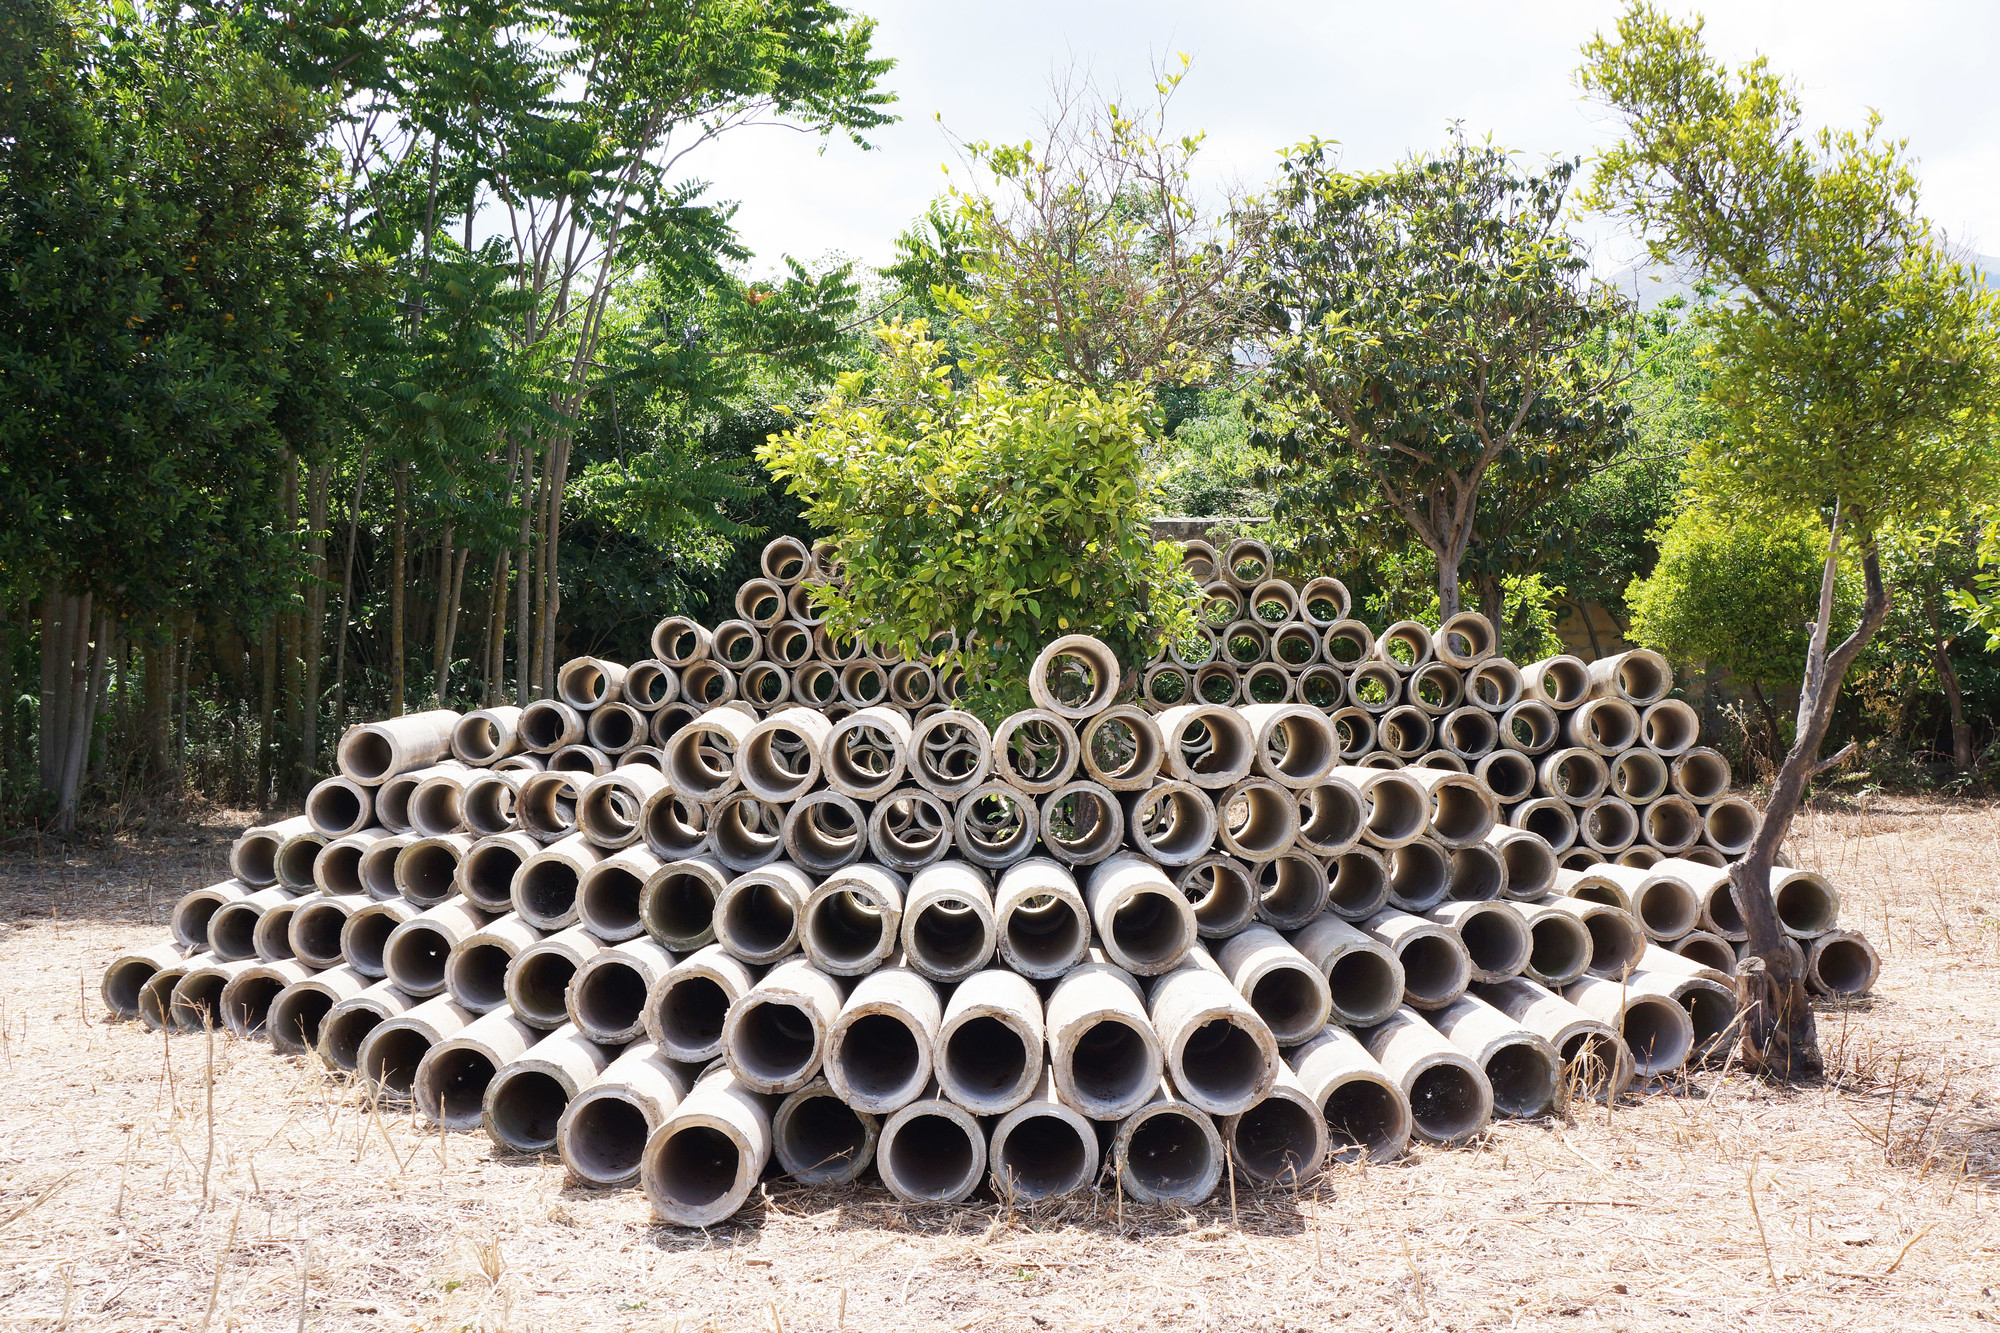 Many light gray concrete tubes sit stacked neatly in a sandy area, with greenery growing behin.